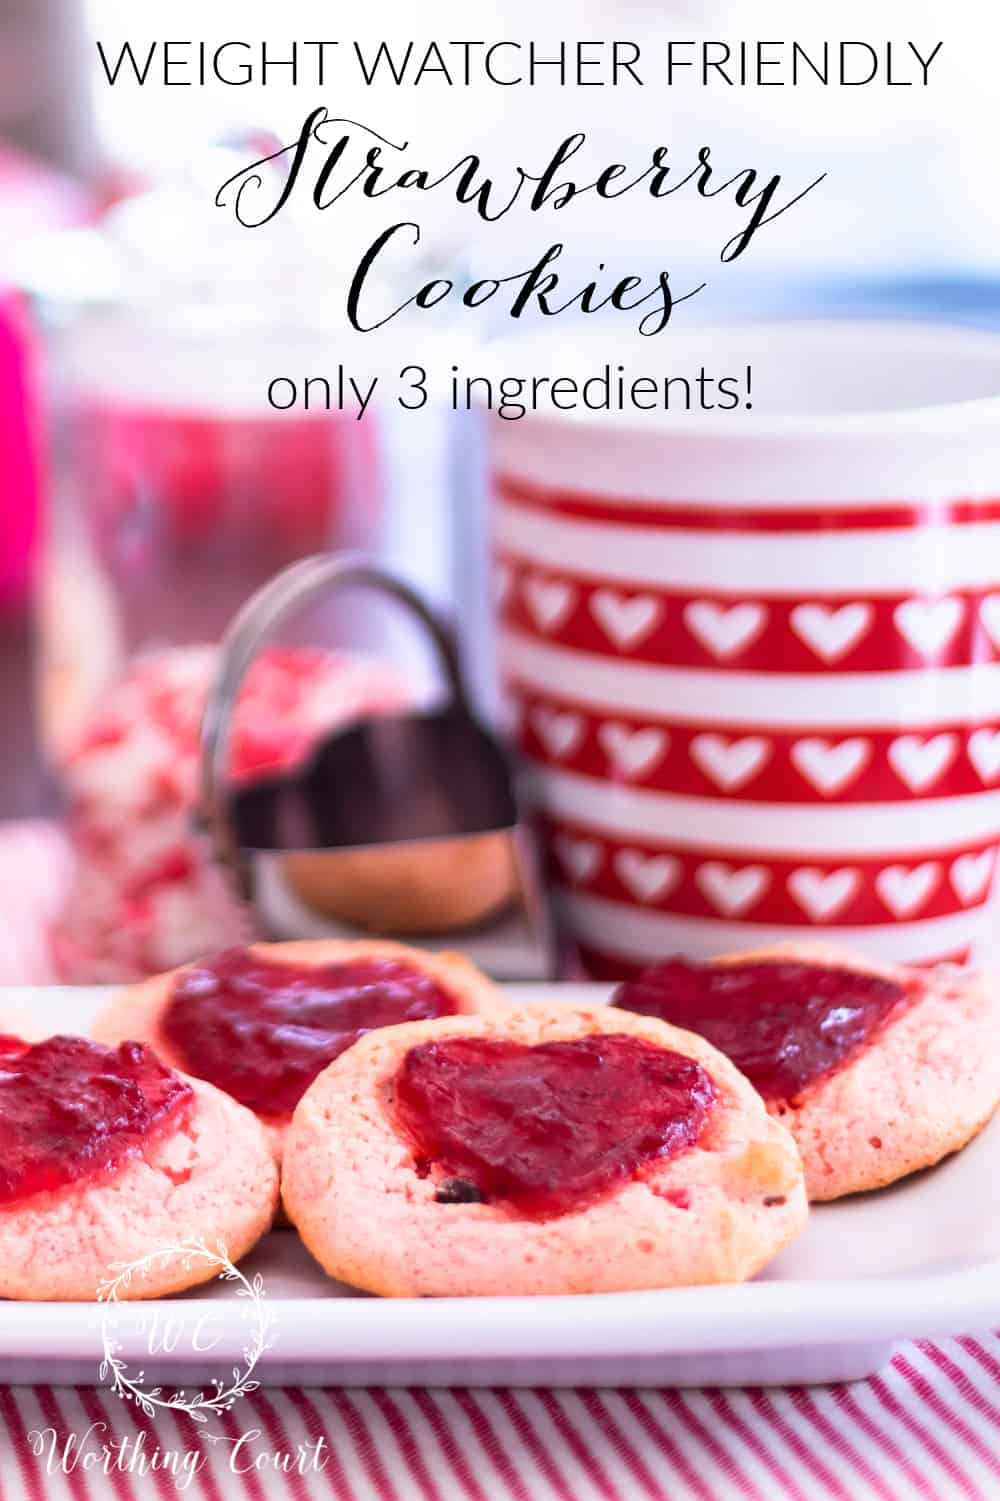 Graphic for Pinterest for a strawberry cookie recipe